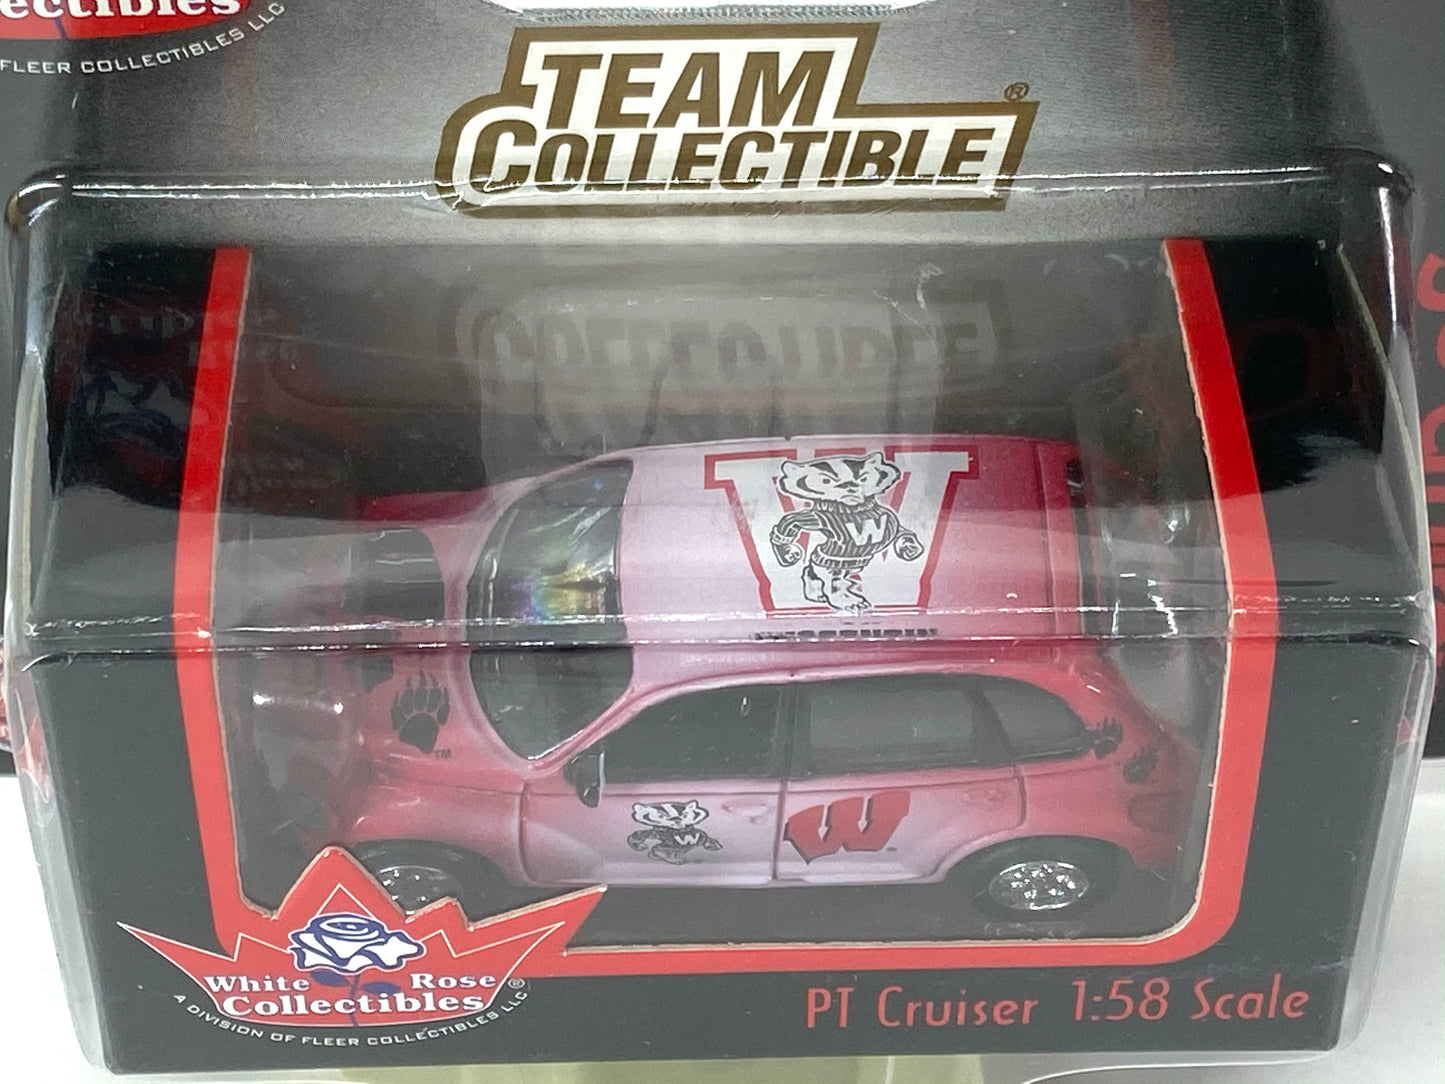 University of Wisconsin Badgers Vintage 2001 NCAA 1:58 PT Cruiser By White Rose Collectibles